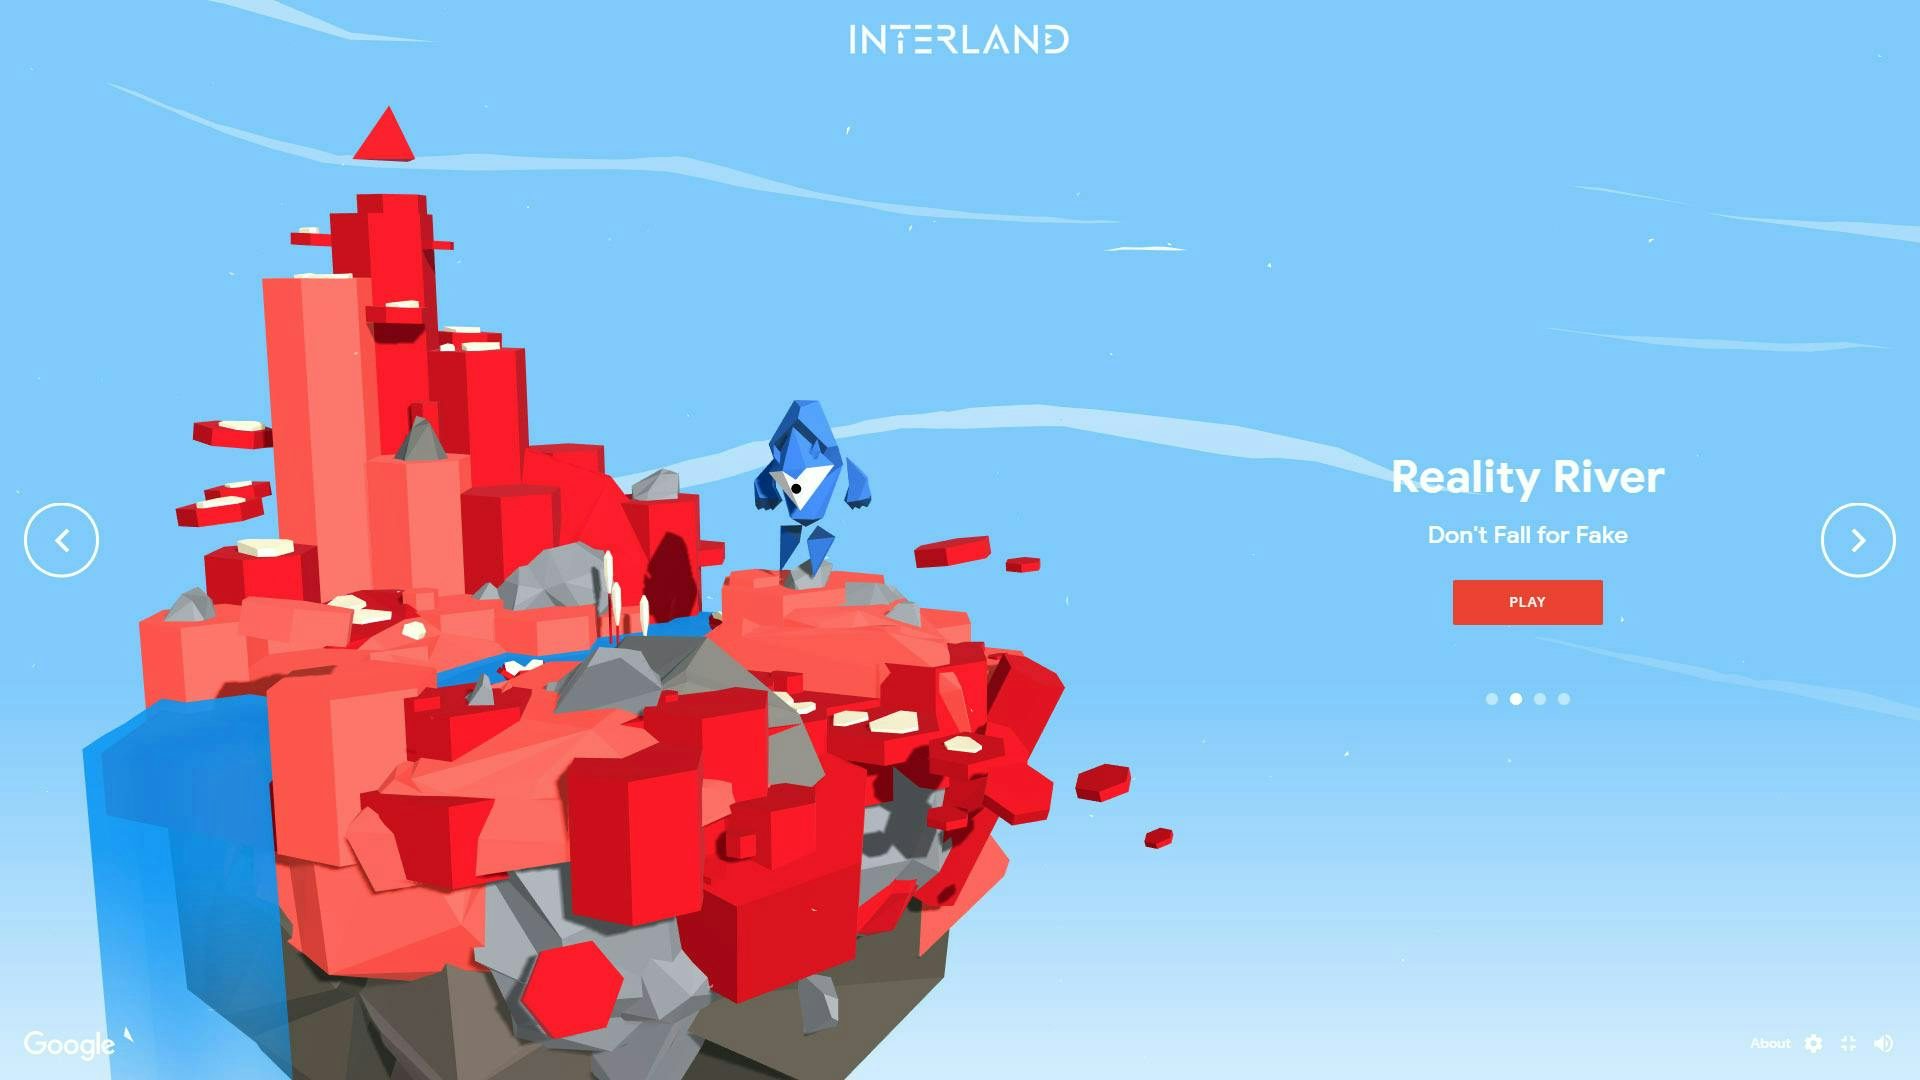 Google Interland Reality River game overview